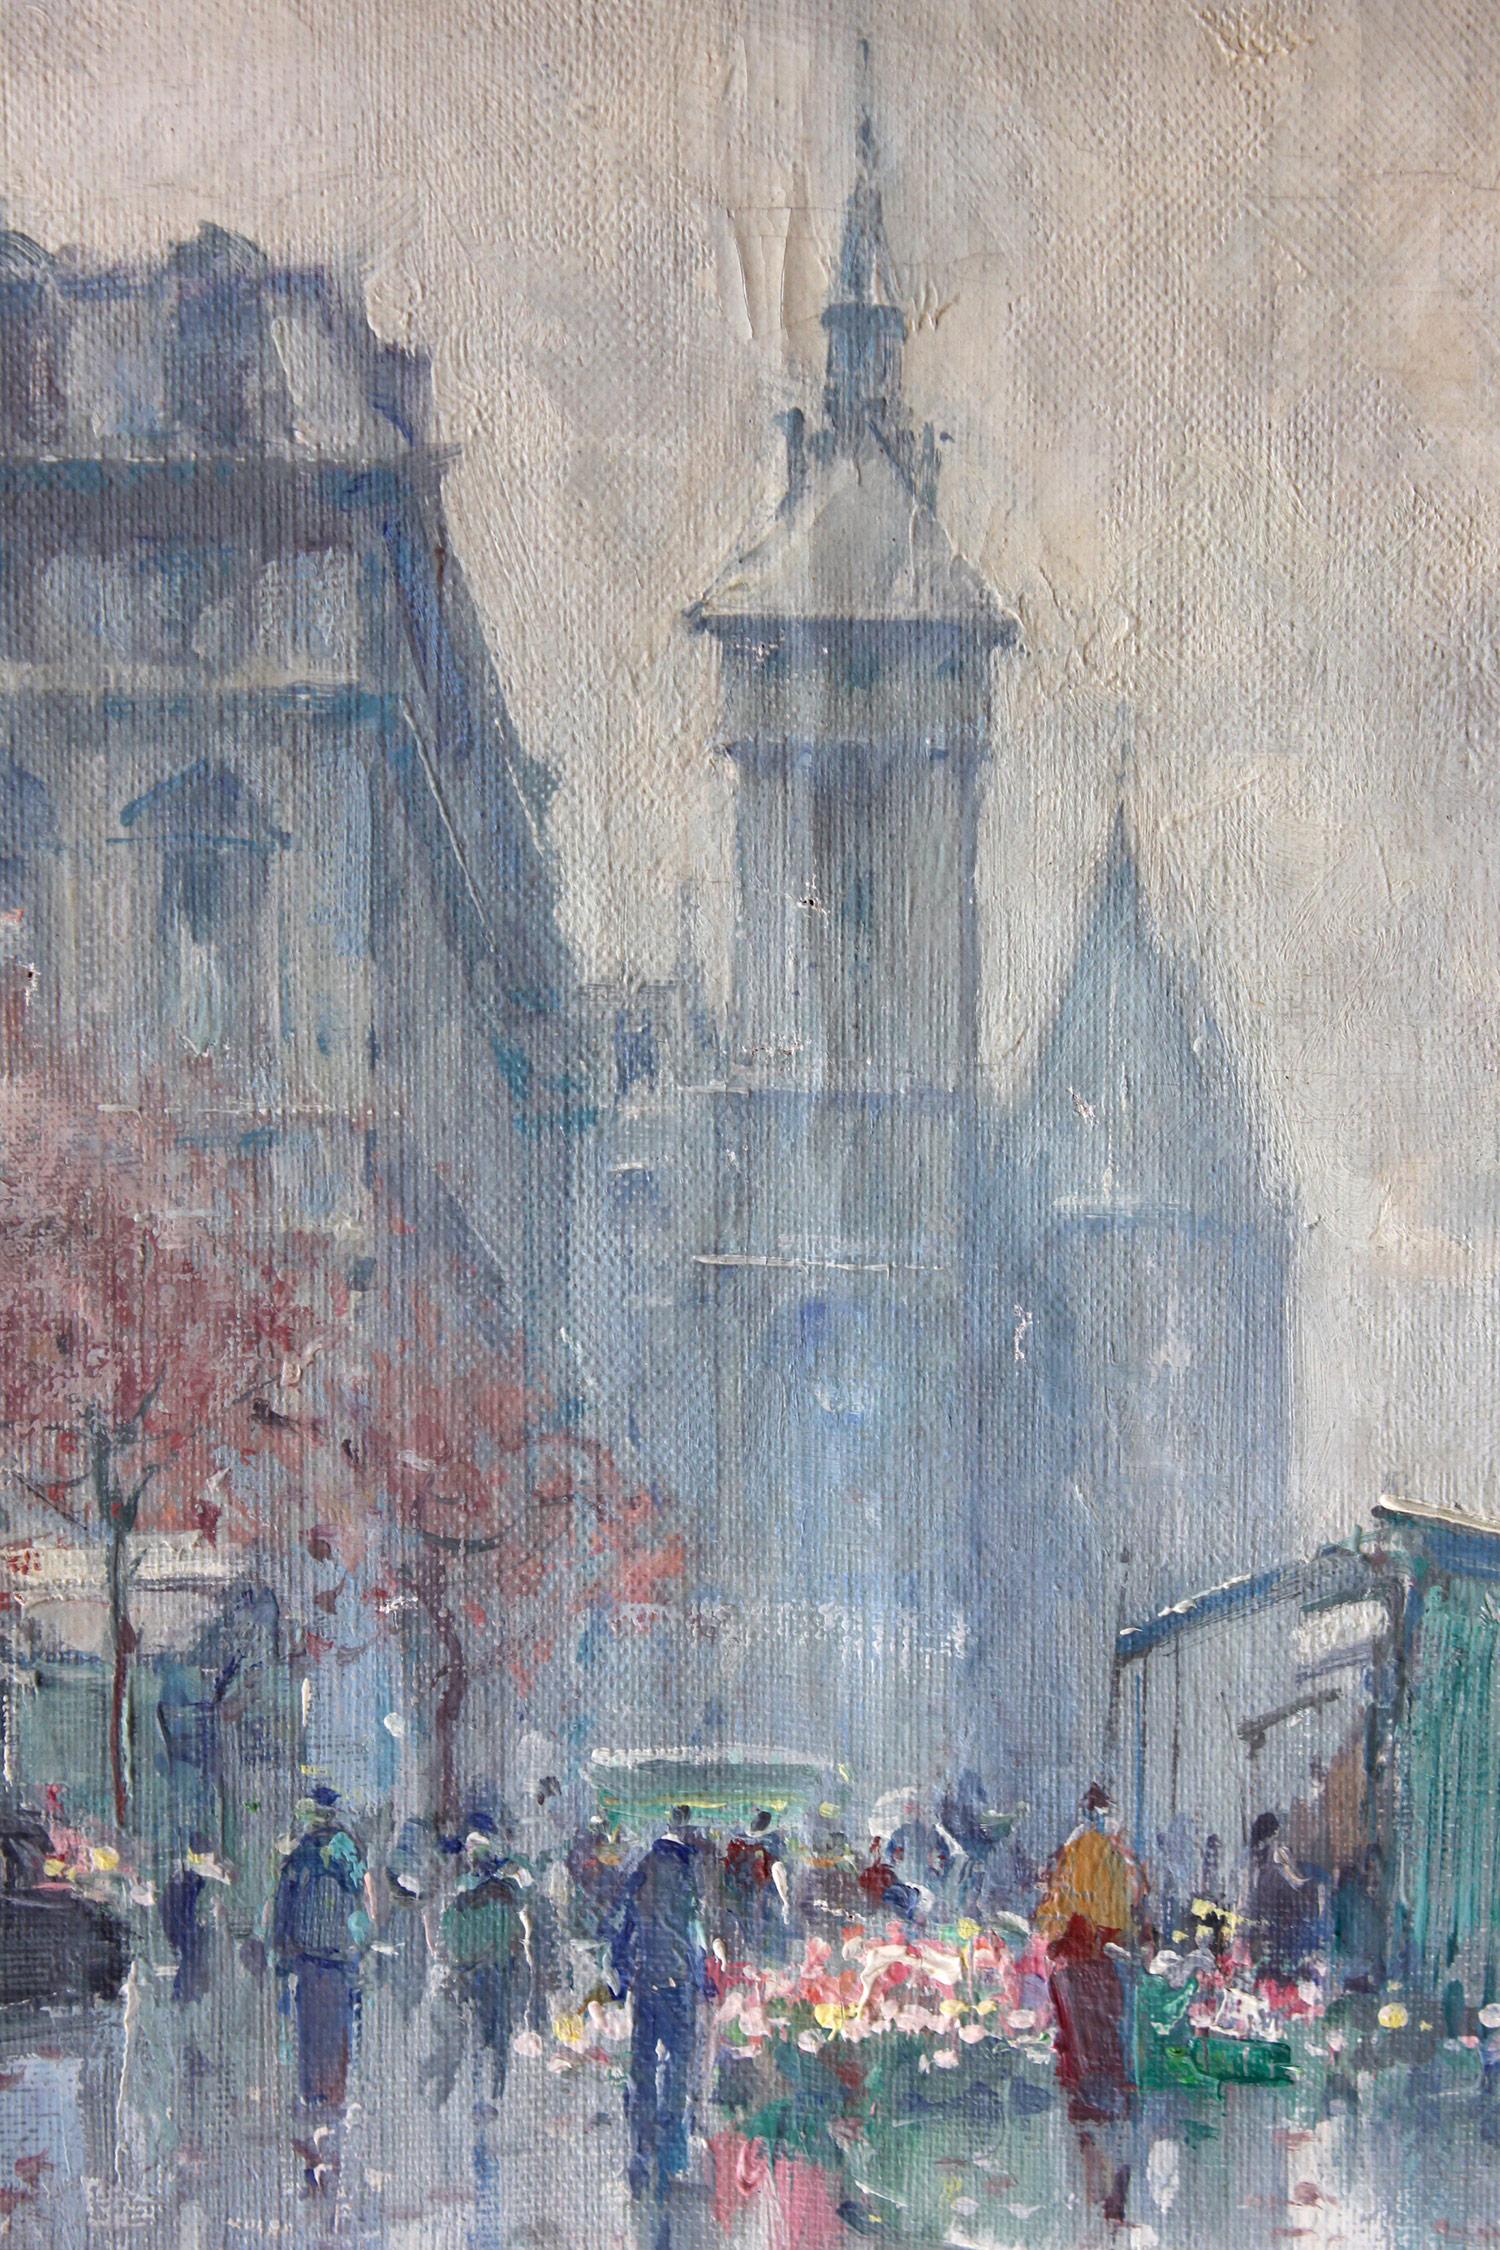 A beautiful oil on canvas painting by the French artist, Jean Salabet. Salabet was a Parisian painter known for his colorful cityscapes depicting the times of his generation. His work is comparable to those of Jules Herve, Antoine Blanchard and